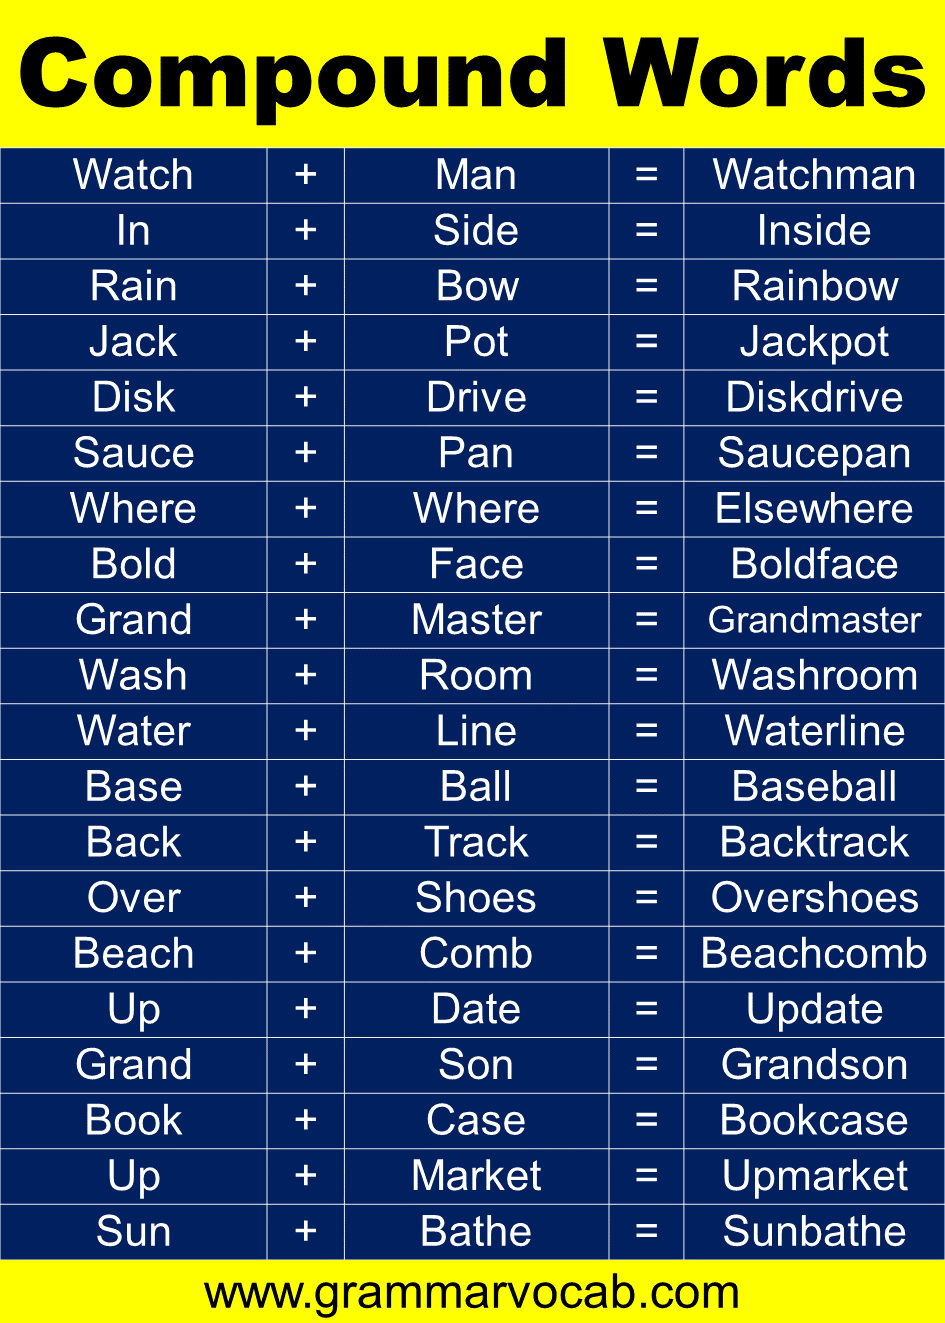 List of Compound Words